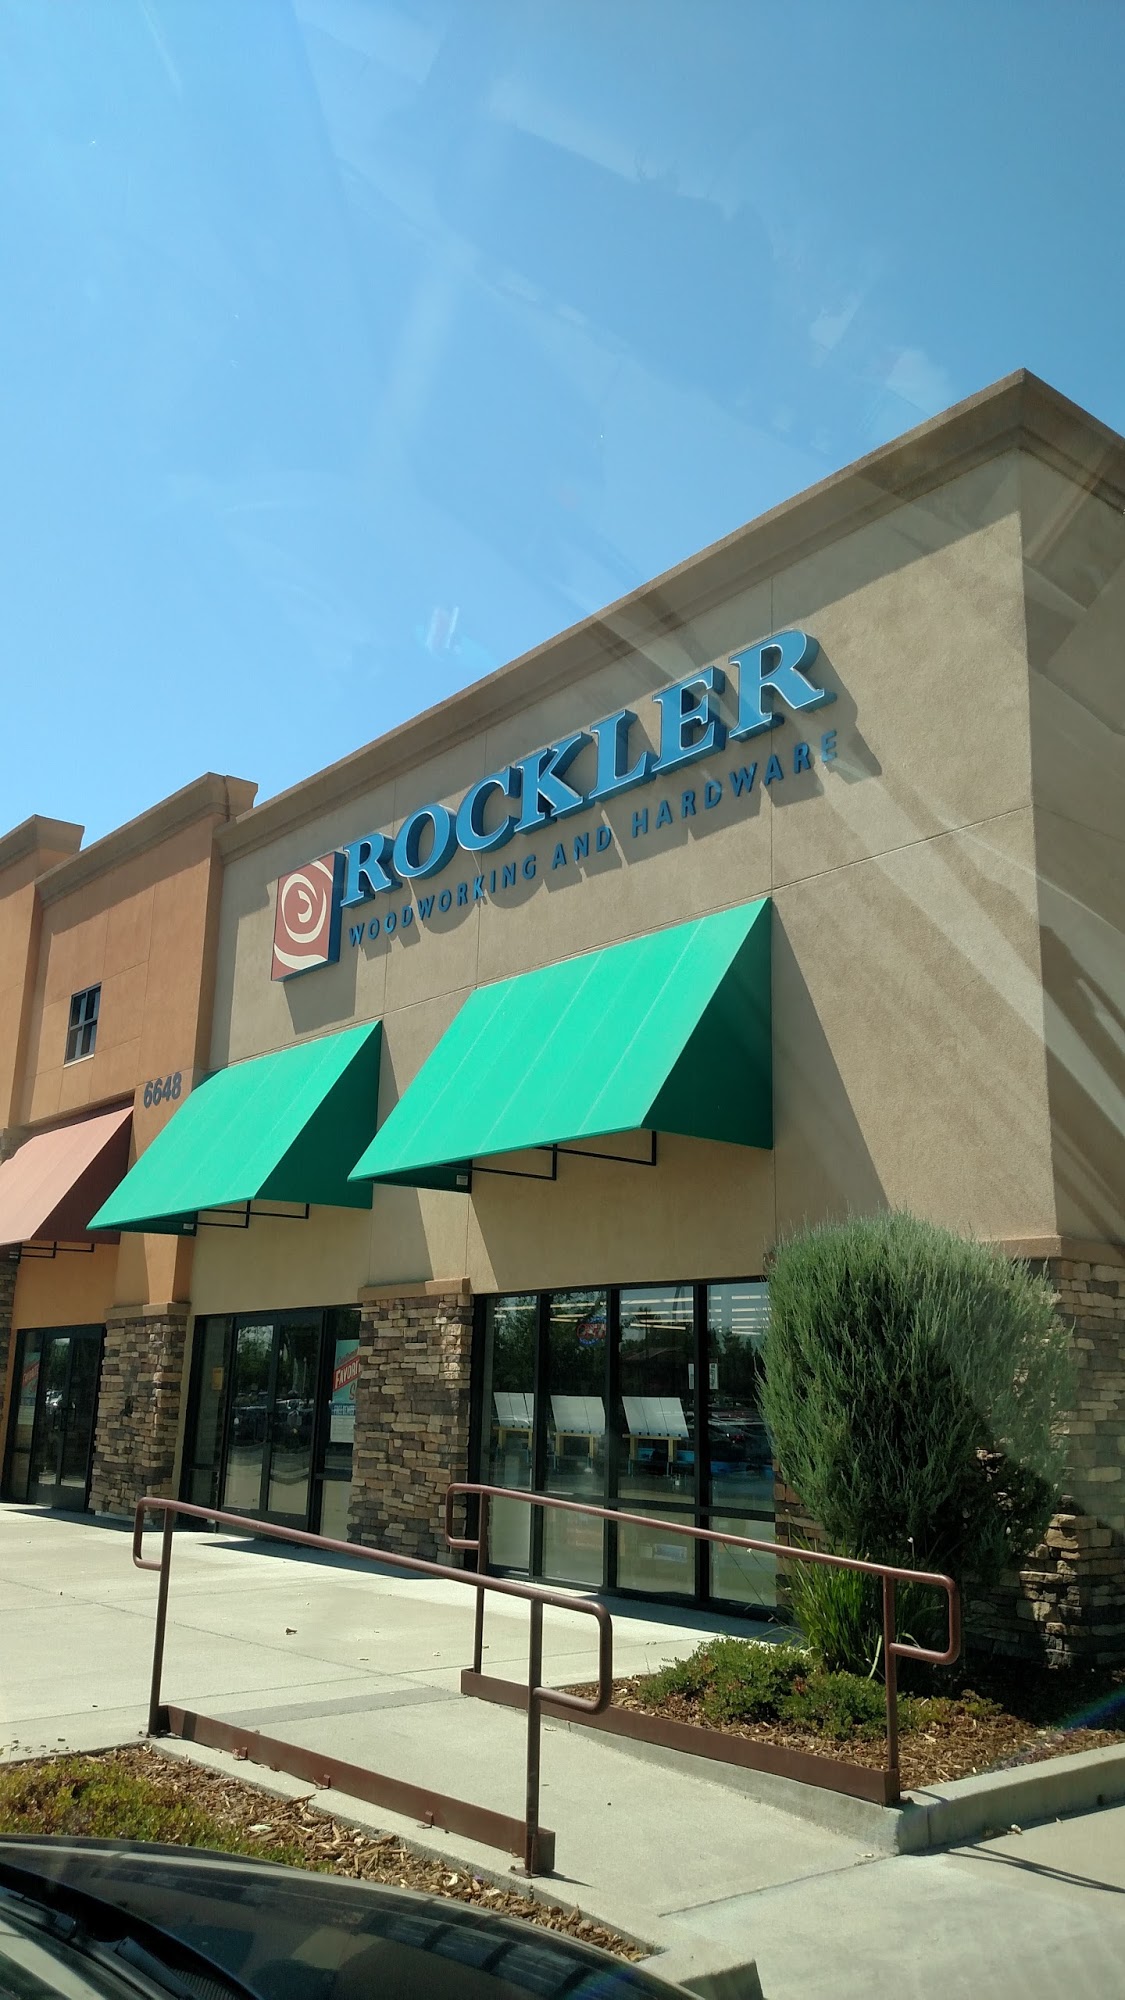 Rockler Woodworking and Hardware - Rocklin